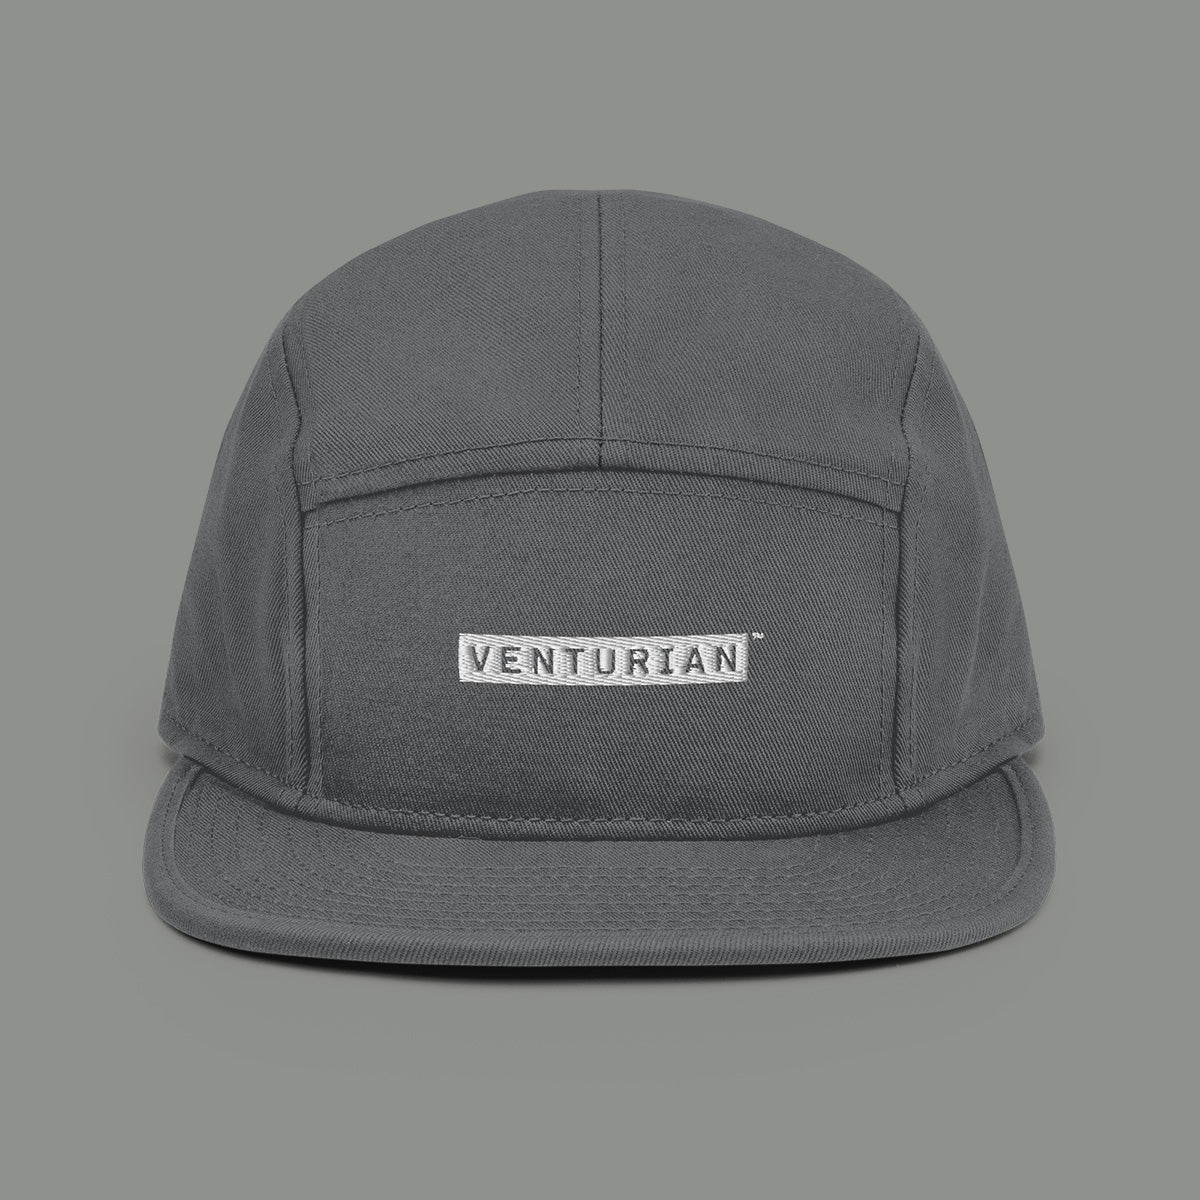 The inimitable Venturian WatchWorks 5 panel camper hat in black, gray and navy. Get yours today.